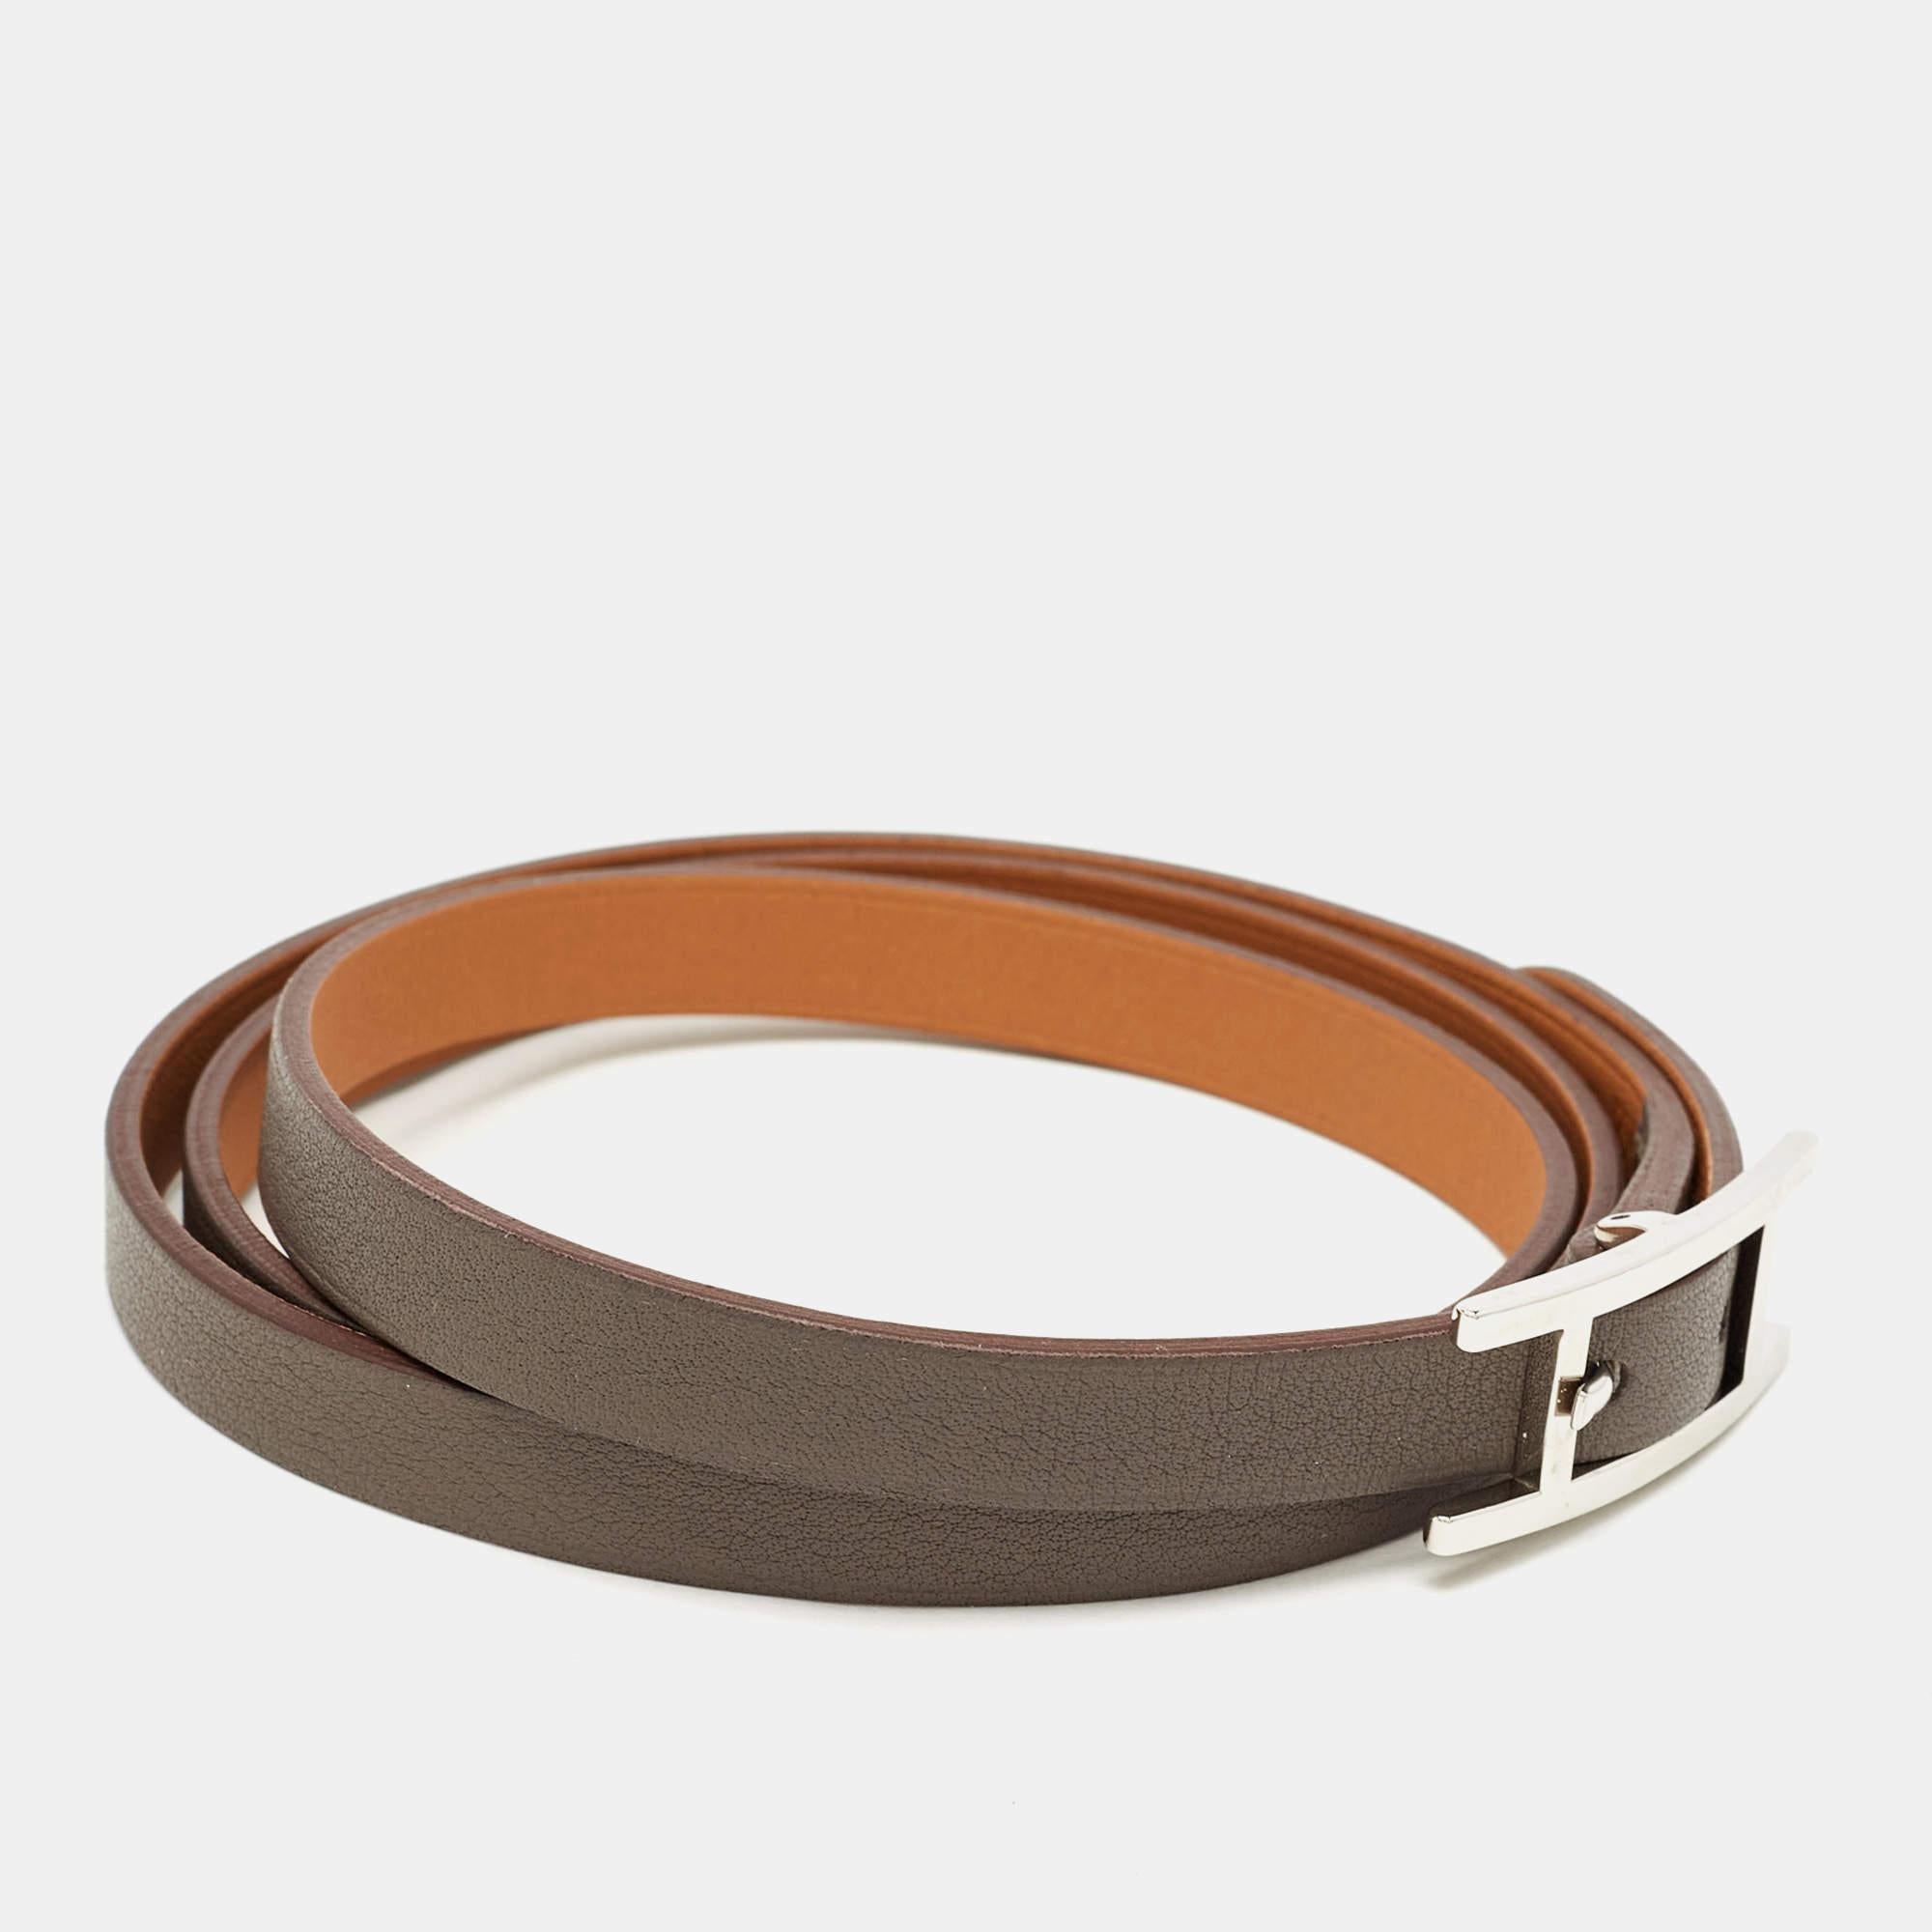 The Hermes bracelet is a luxurious and stylish accessory that exudes timeless elegance. Crafted from supple Swift leather, this bracelet features a sleek and minimalist design with a silver-tone H-shaped clasp. The rich color and fine craftsmanship